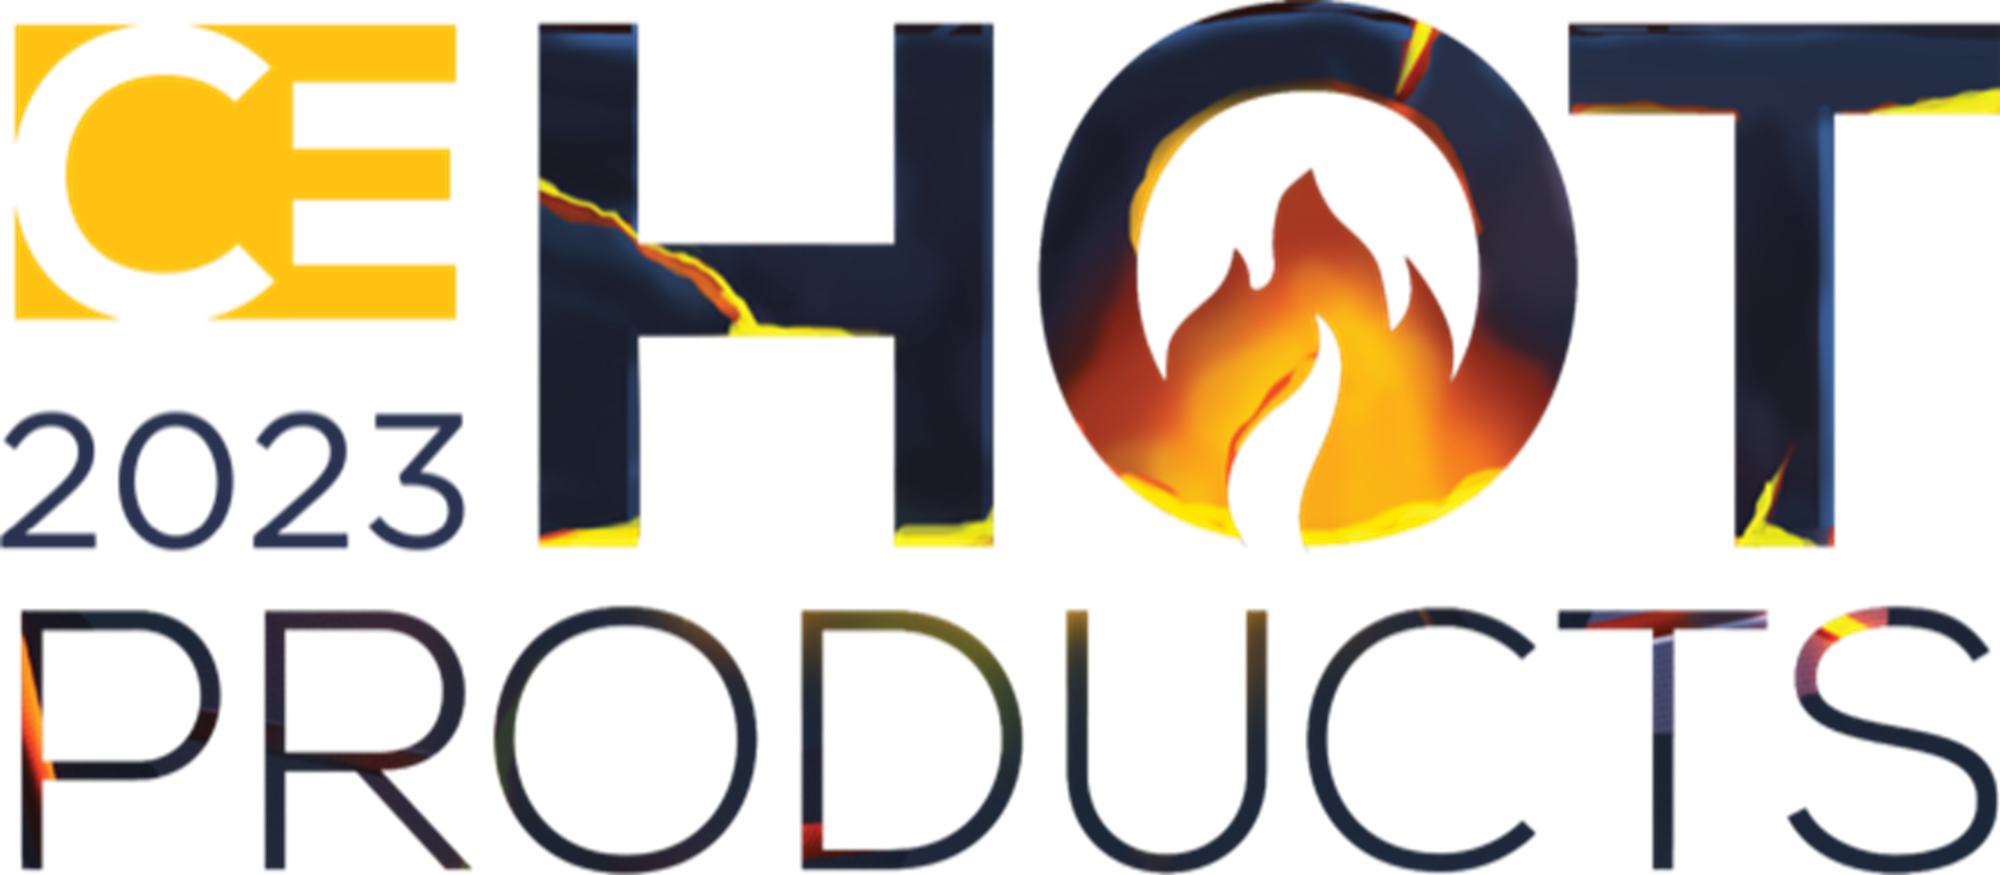 Explorer Named One of the 2023 Hot Products Explorer Software